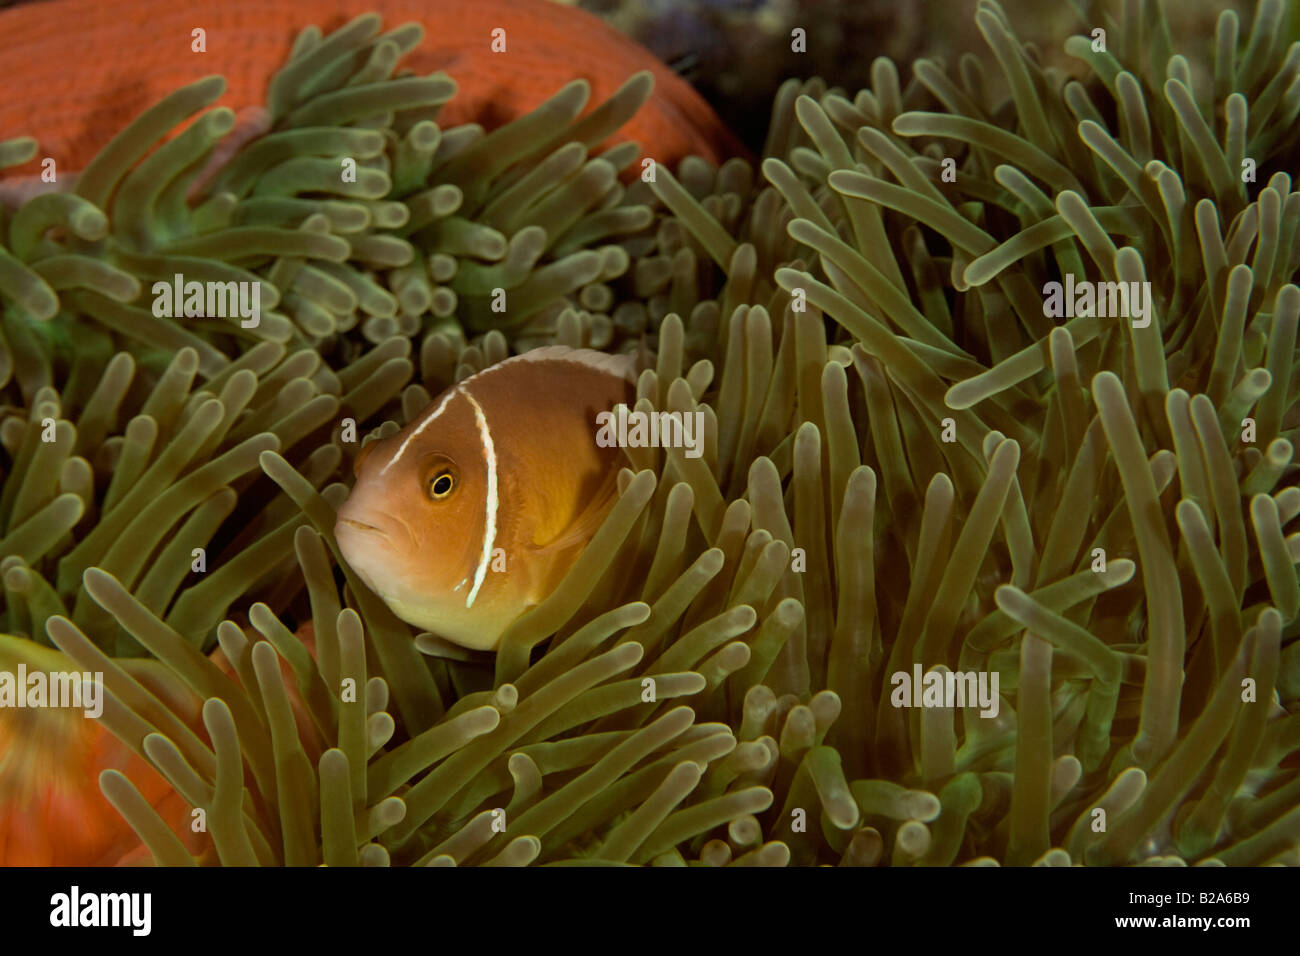 An anemonefish (clown fish) trying to hide in an orange anemone. Stock Photo